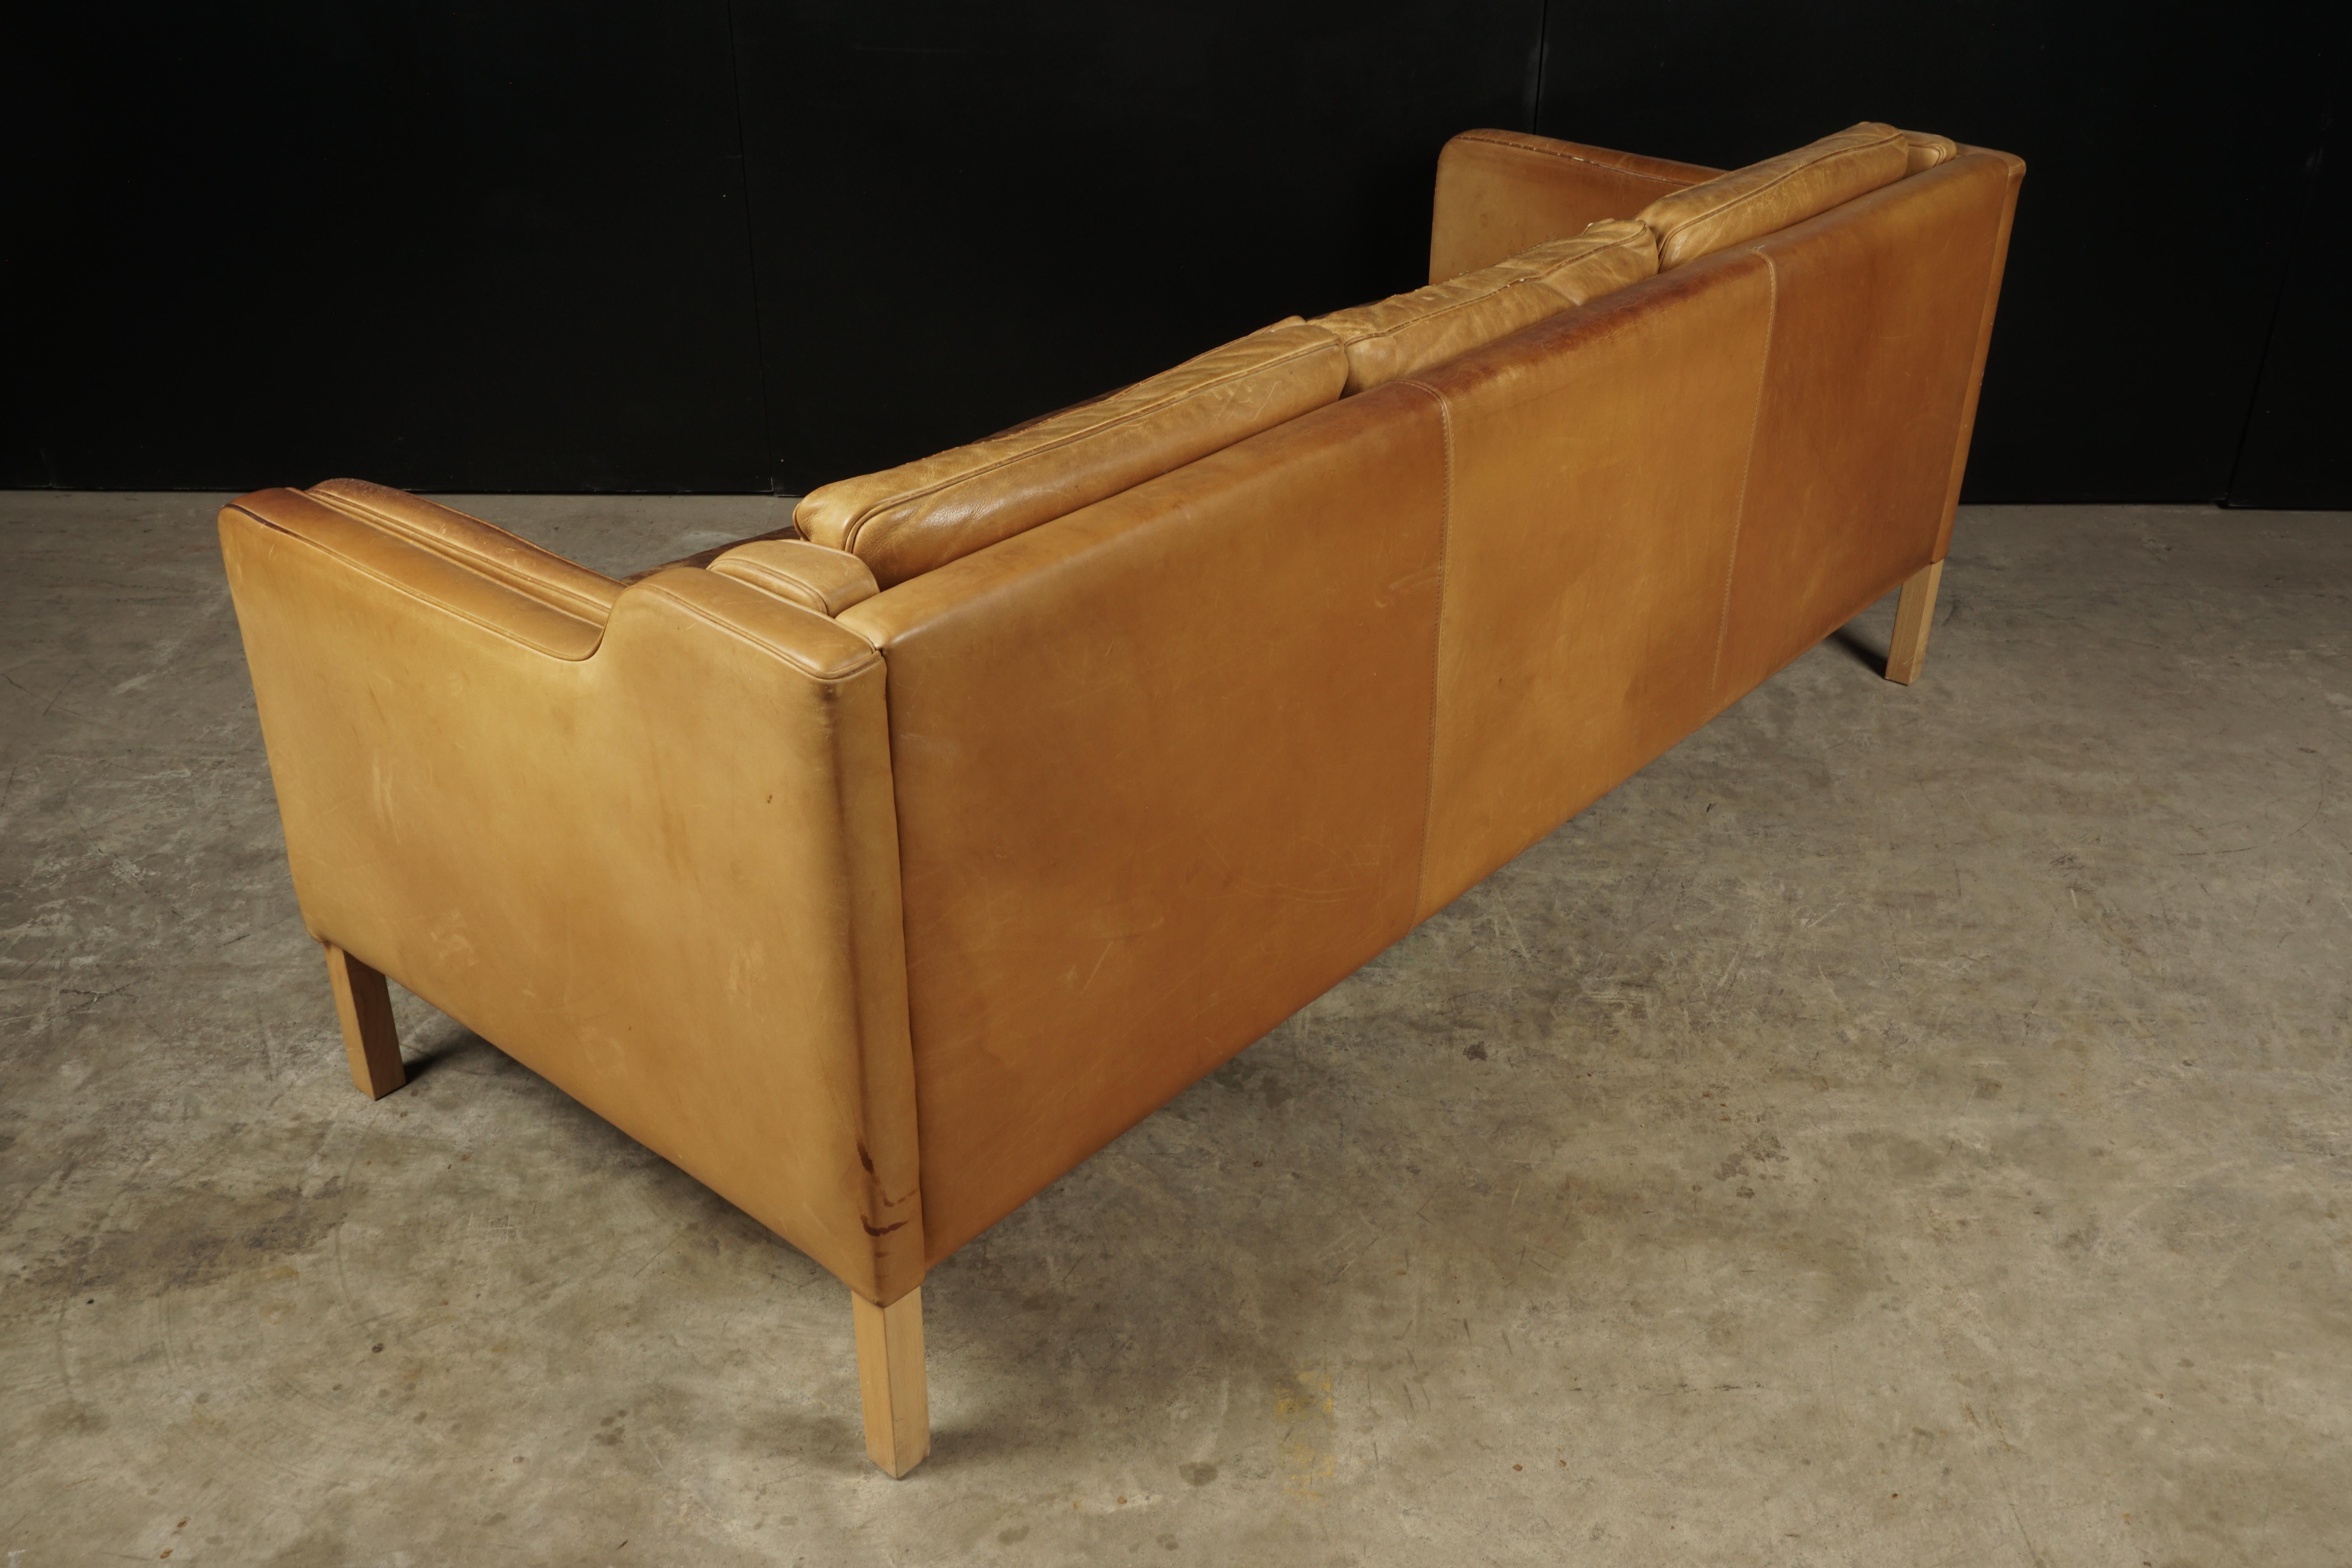 Late 20th Century Midcentury Sofa from Denmark in Cognac Leather, circa 1970